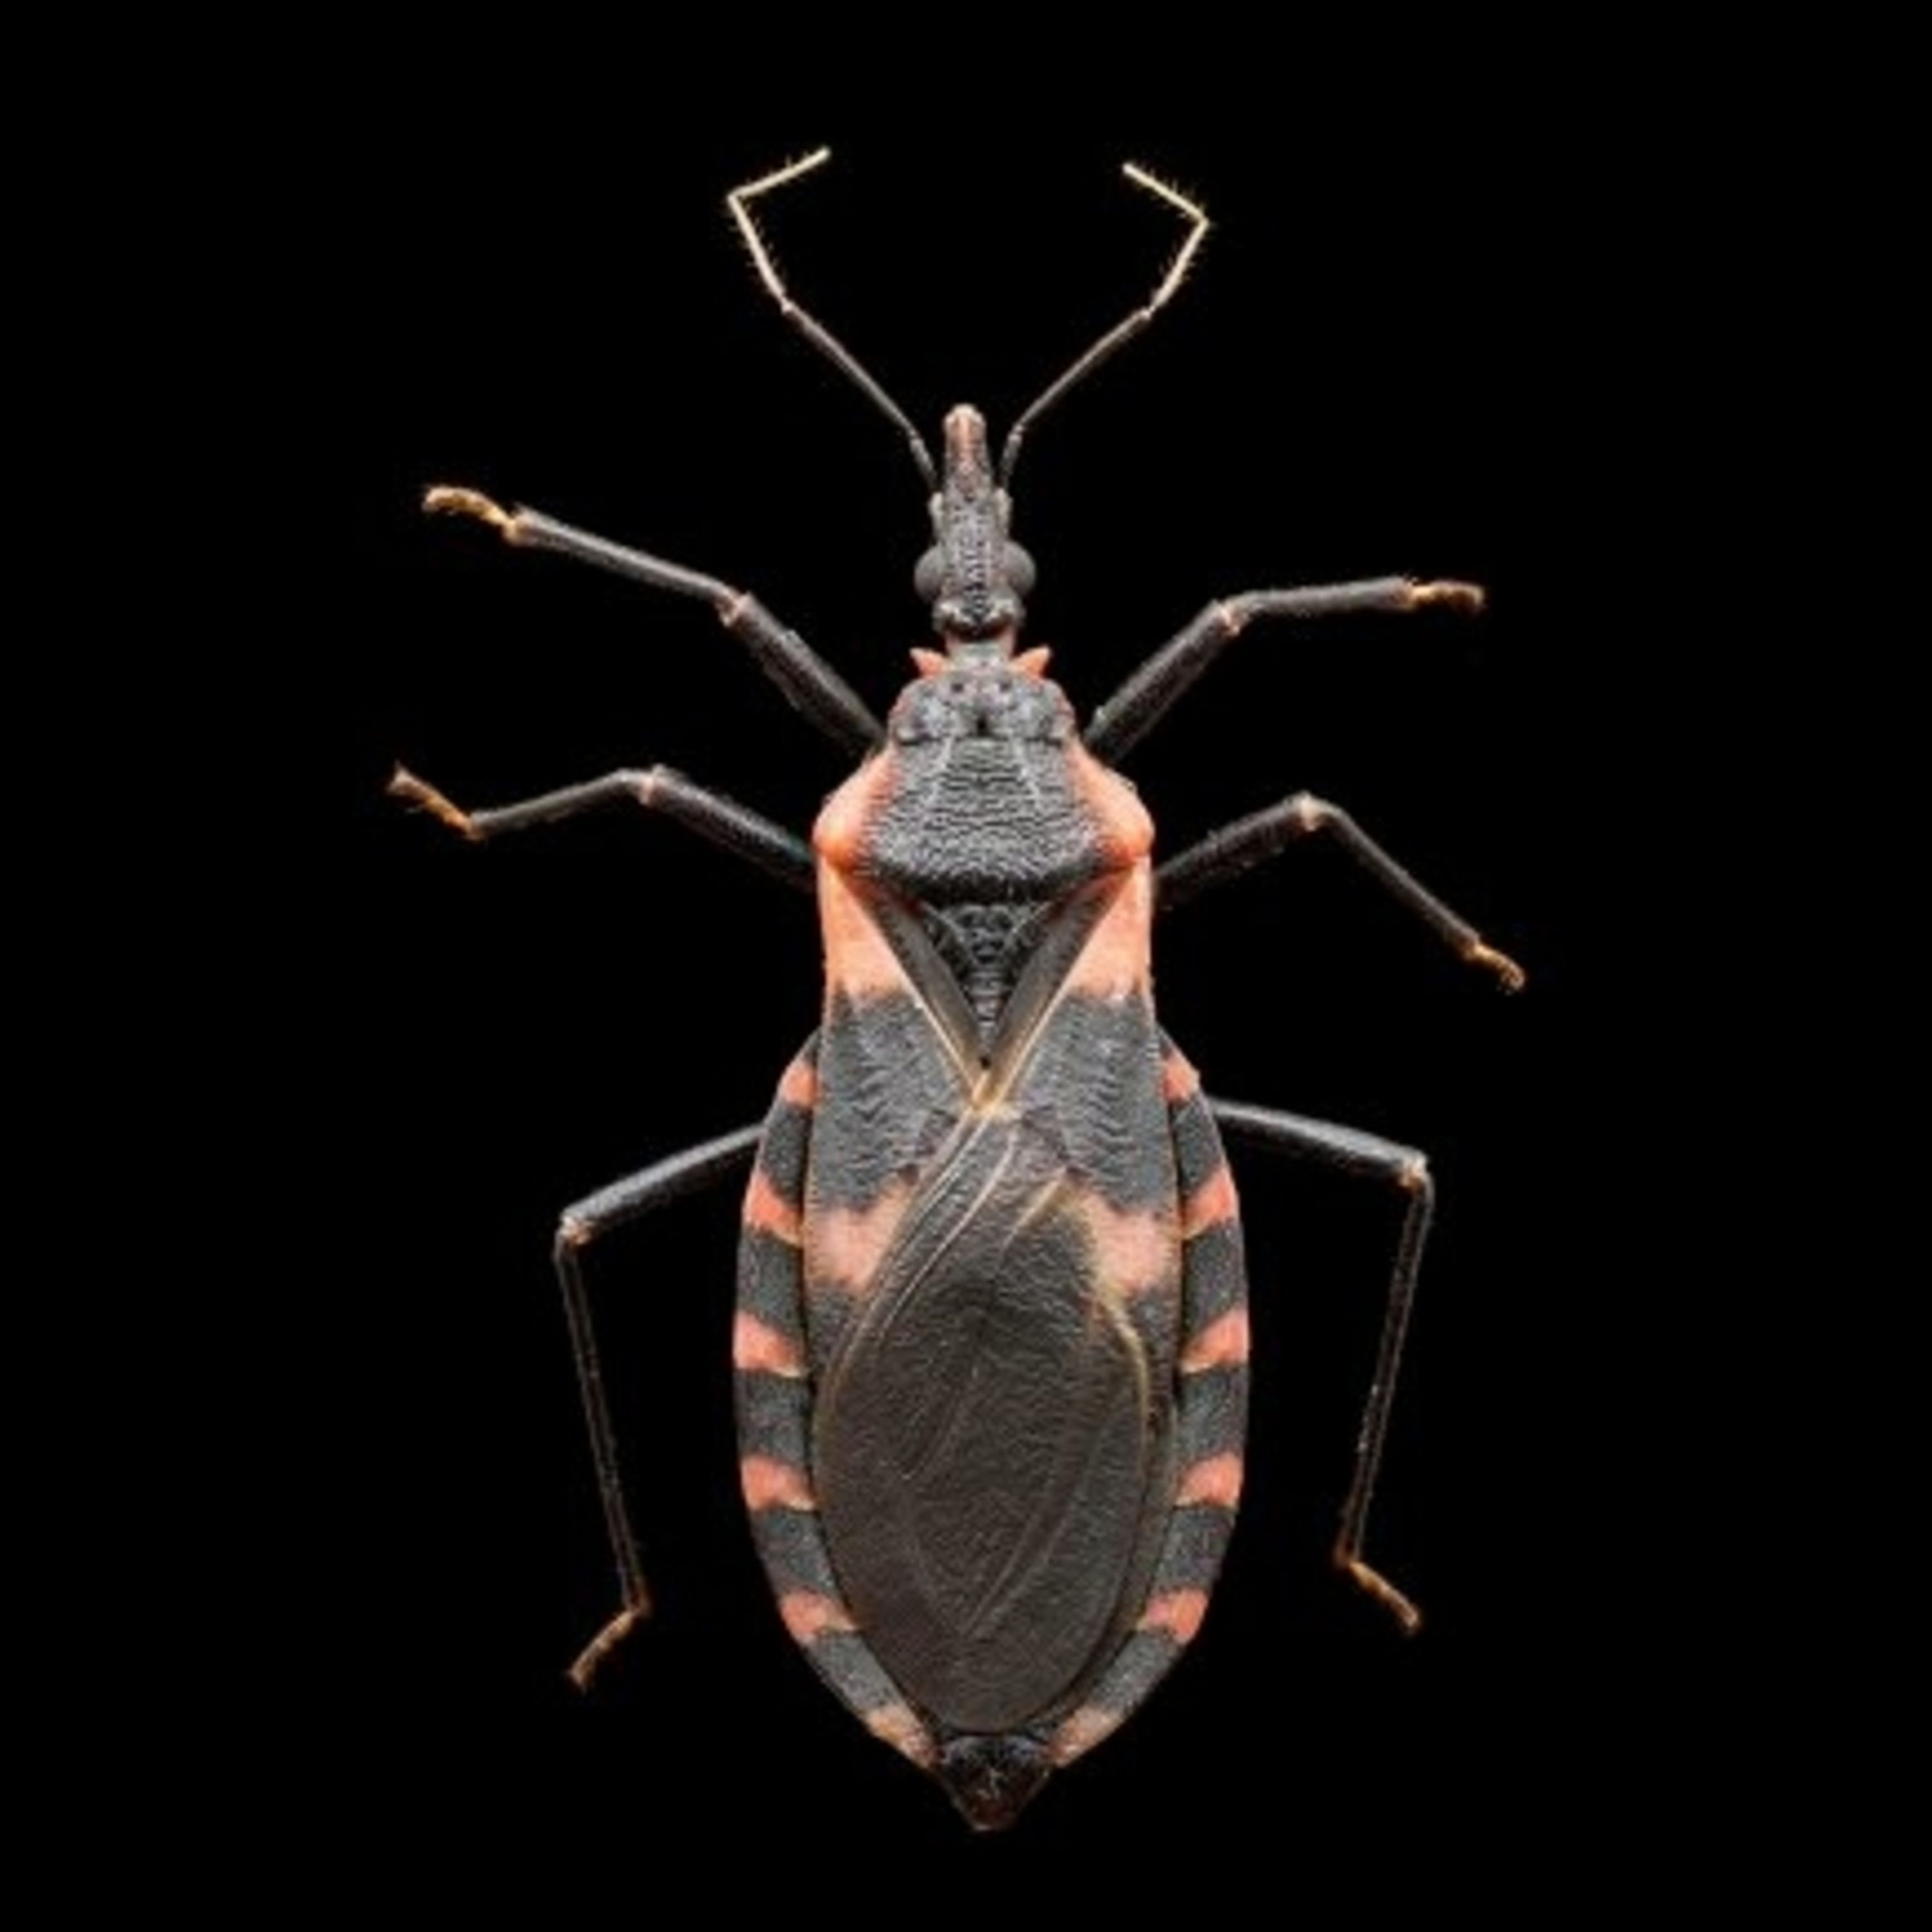 Episode 32: Chagas disease in the United States